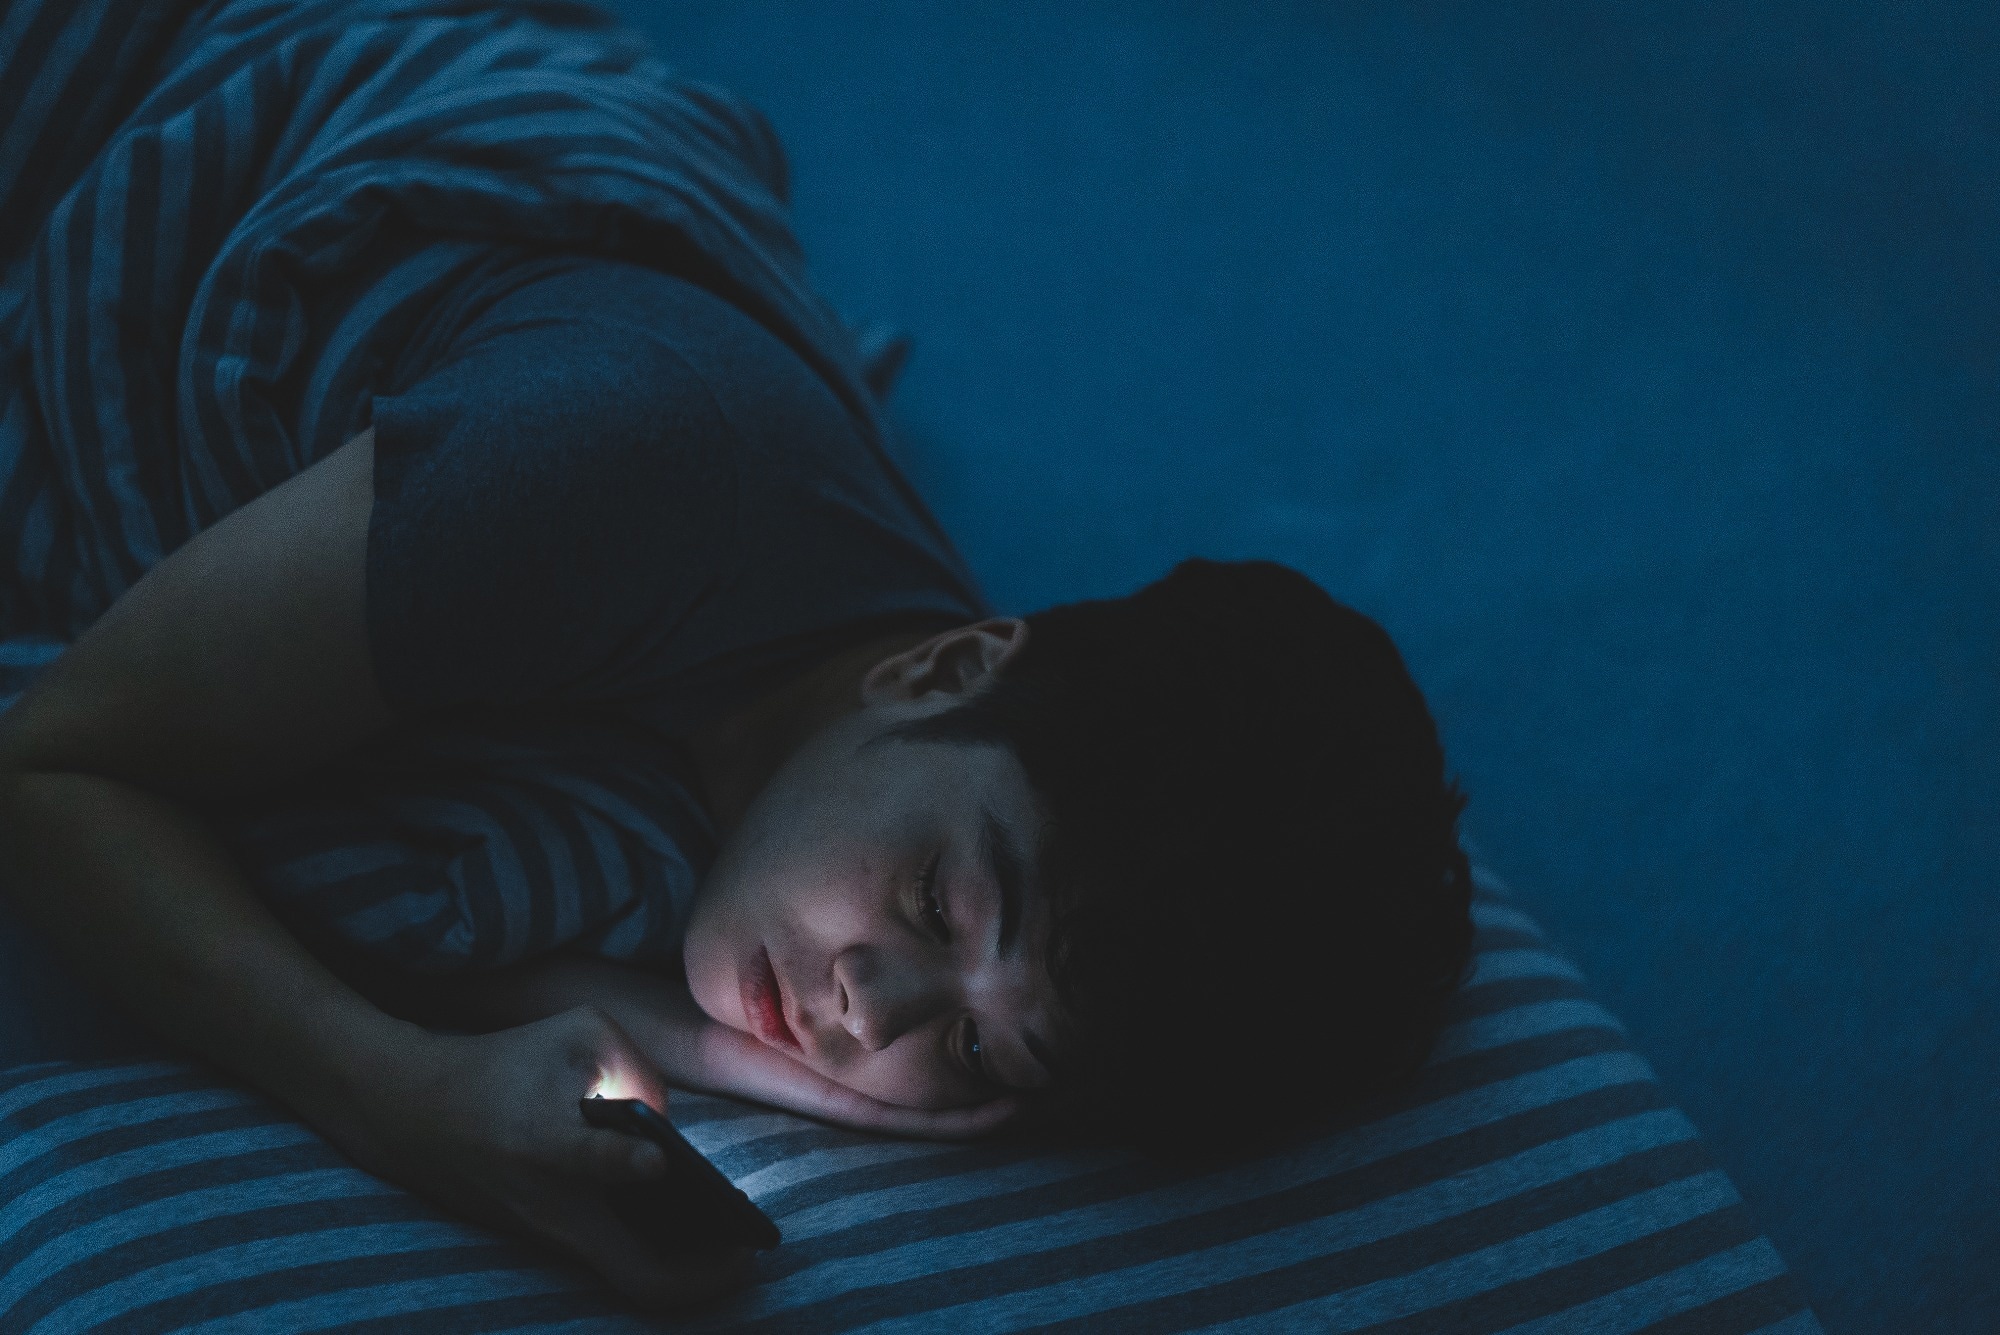 Study: Circadian Misalignment Impacts the Association of Visceral Adiposity With Elevated Blood Pressure in Adolescents. Hypertension. Image Credit: ivansnap / Shutterstock